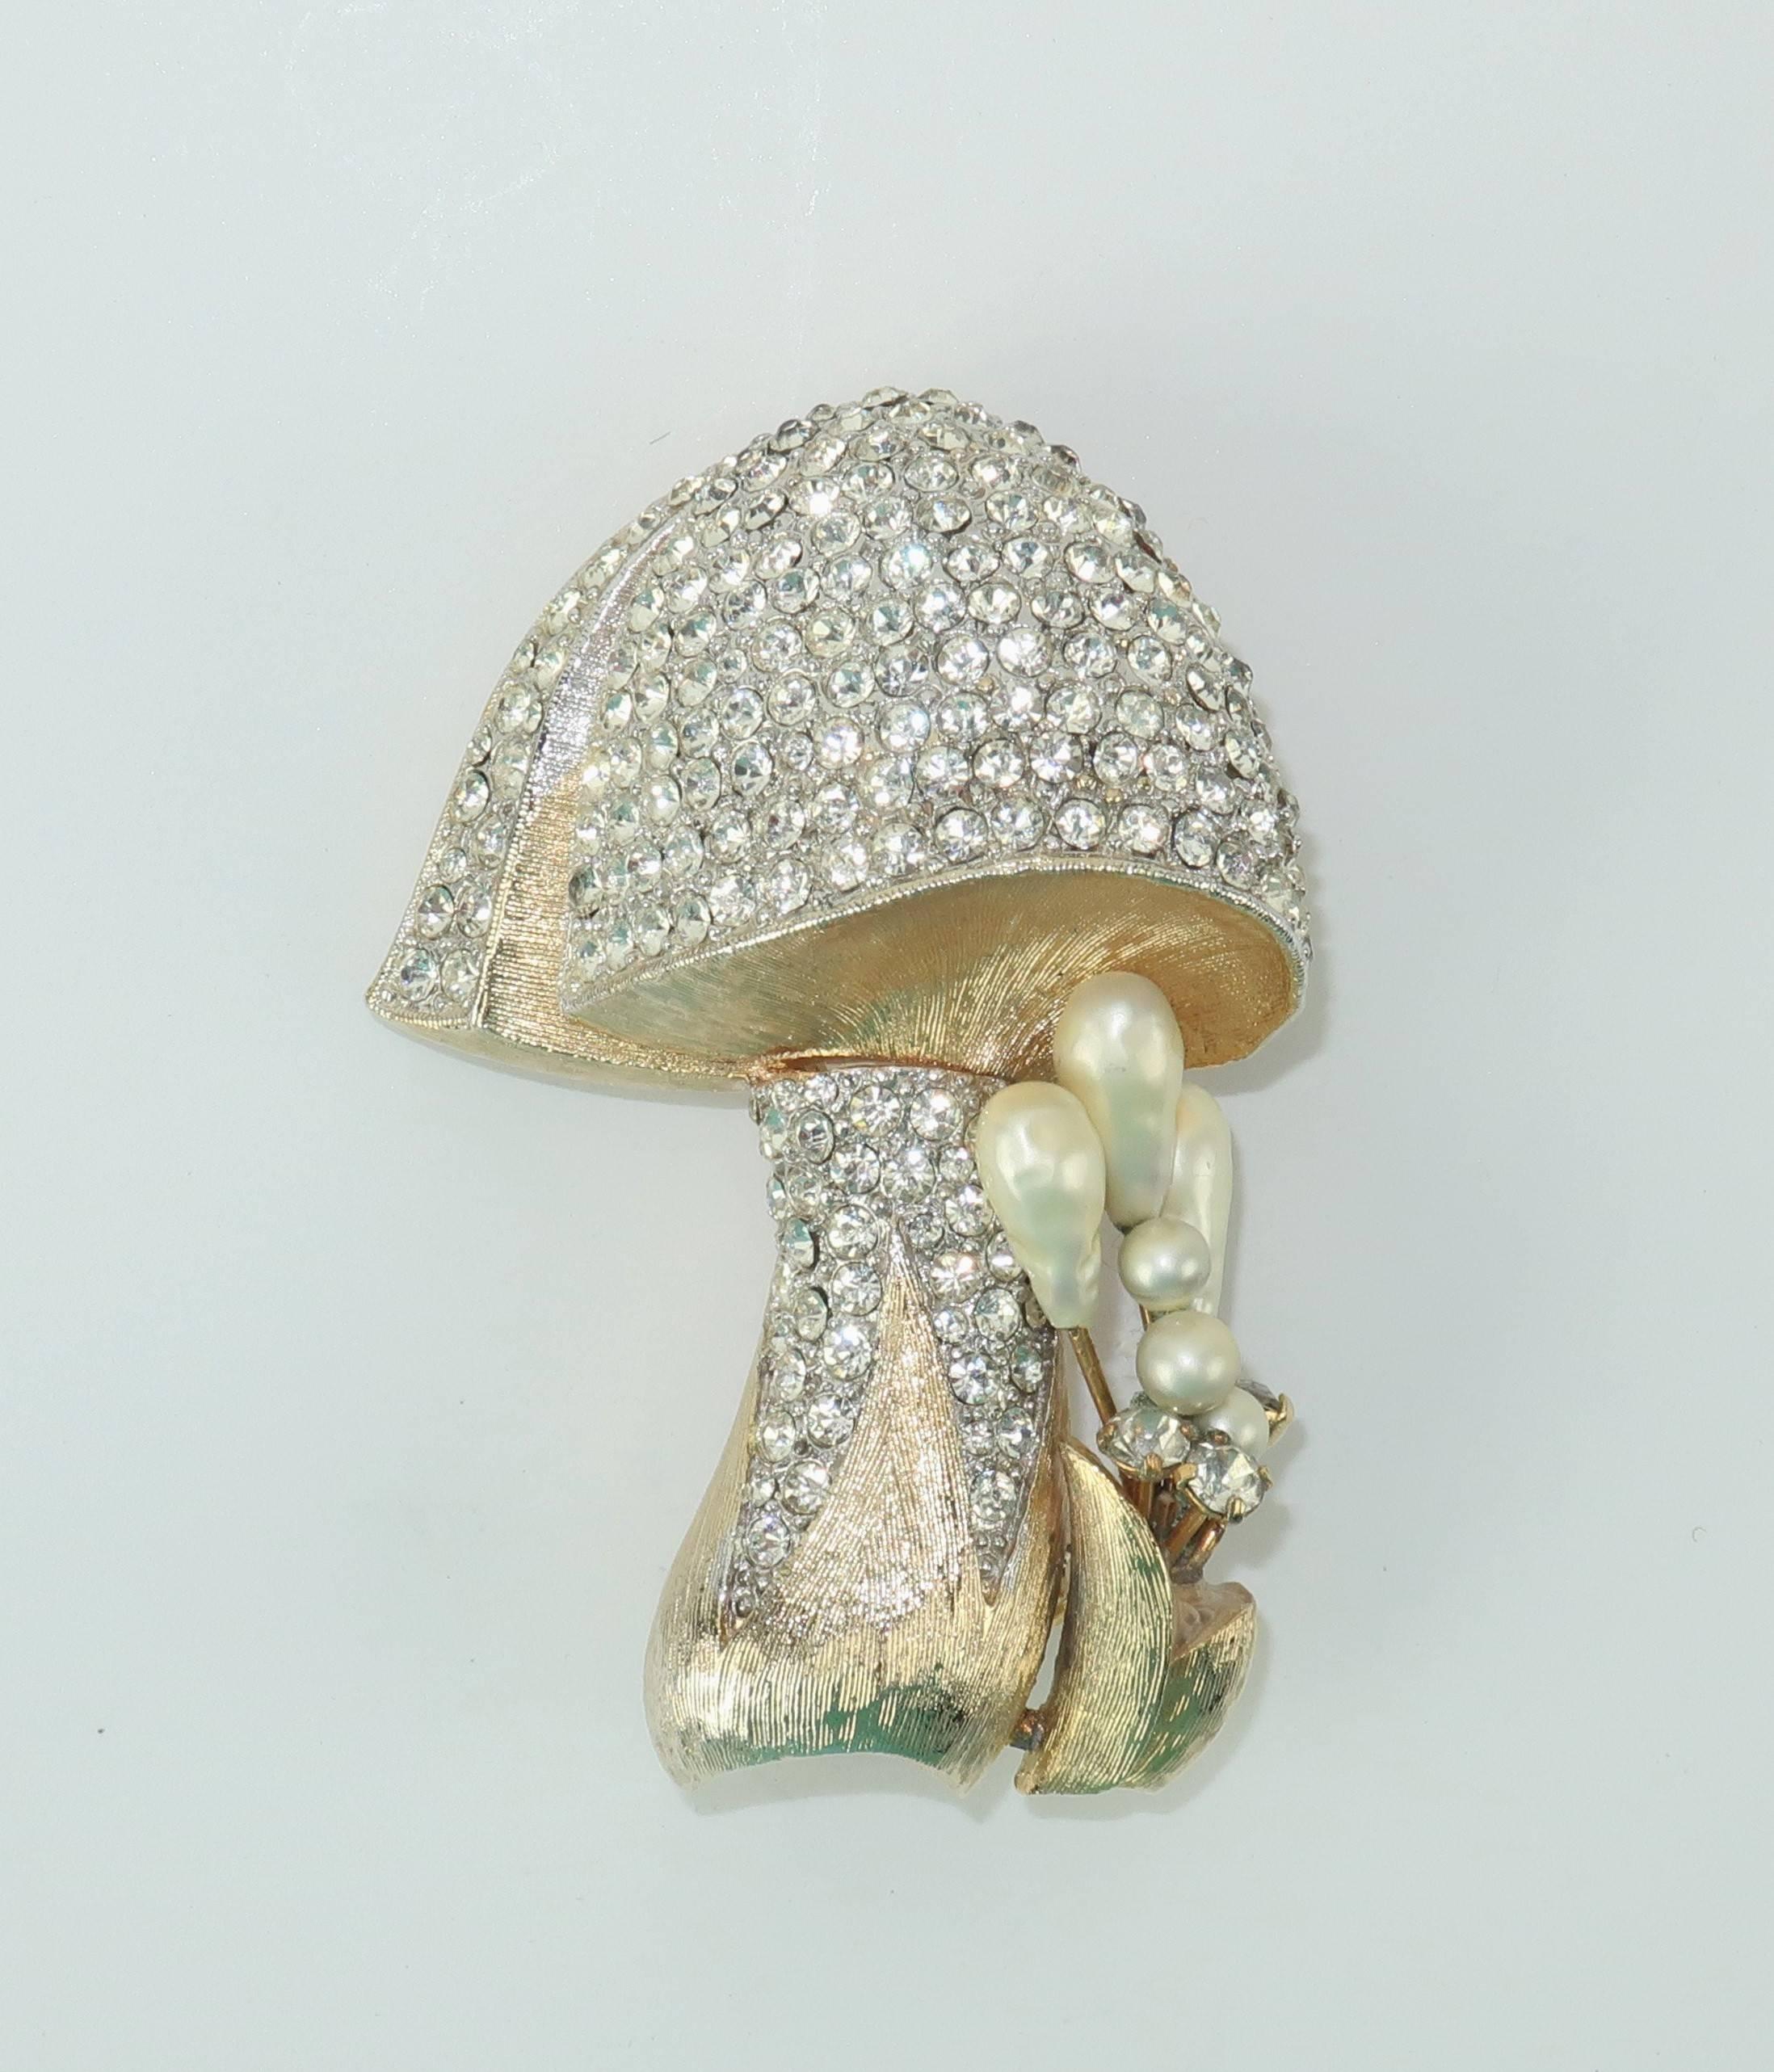 Add a whimsical piece of flora to your lapel with this gold tone mushroom brooch accented with crystal rhinestones and faux pearls.  The adorable 1950's accessory measures 2